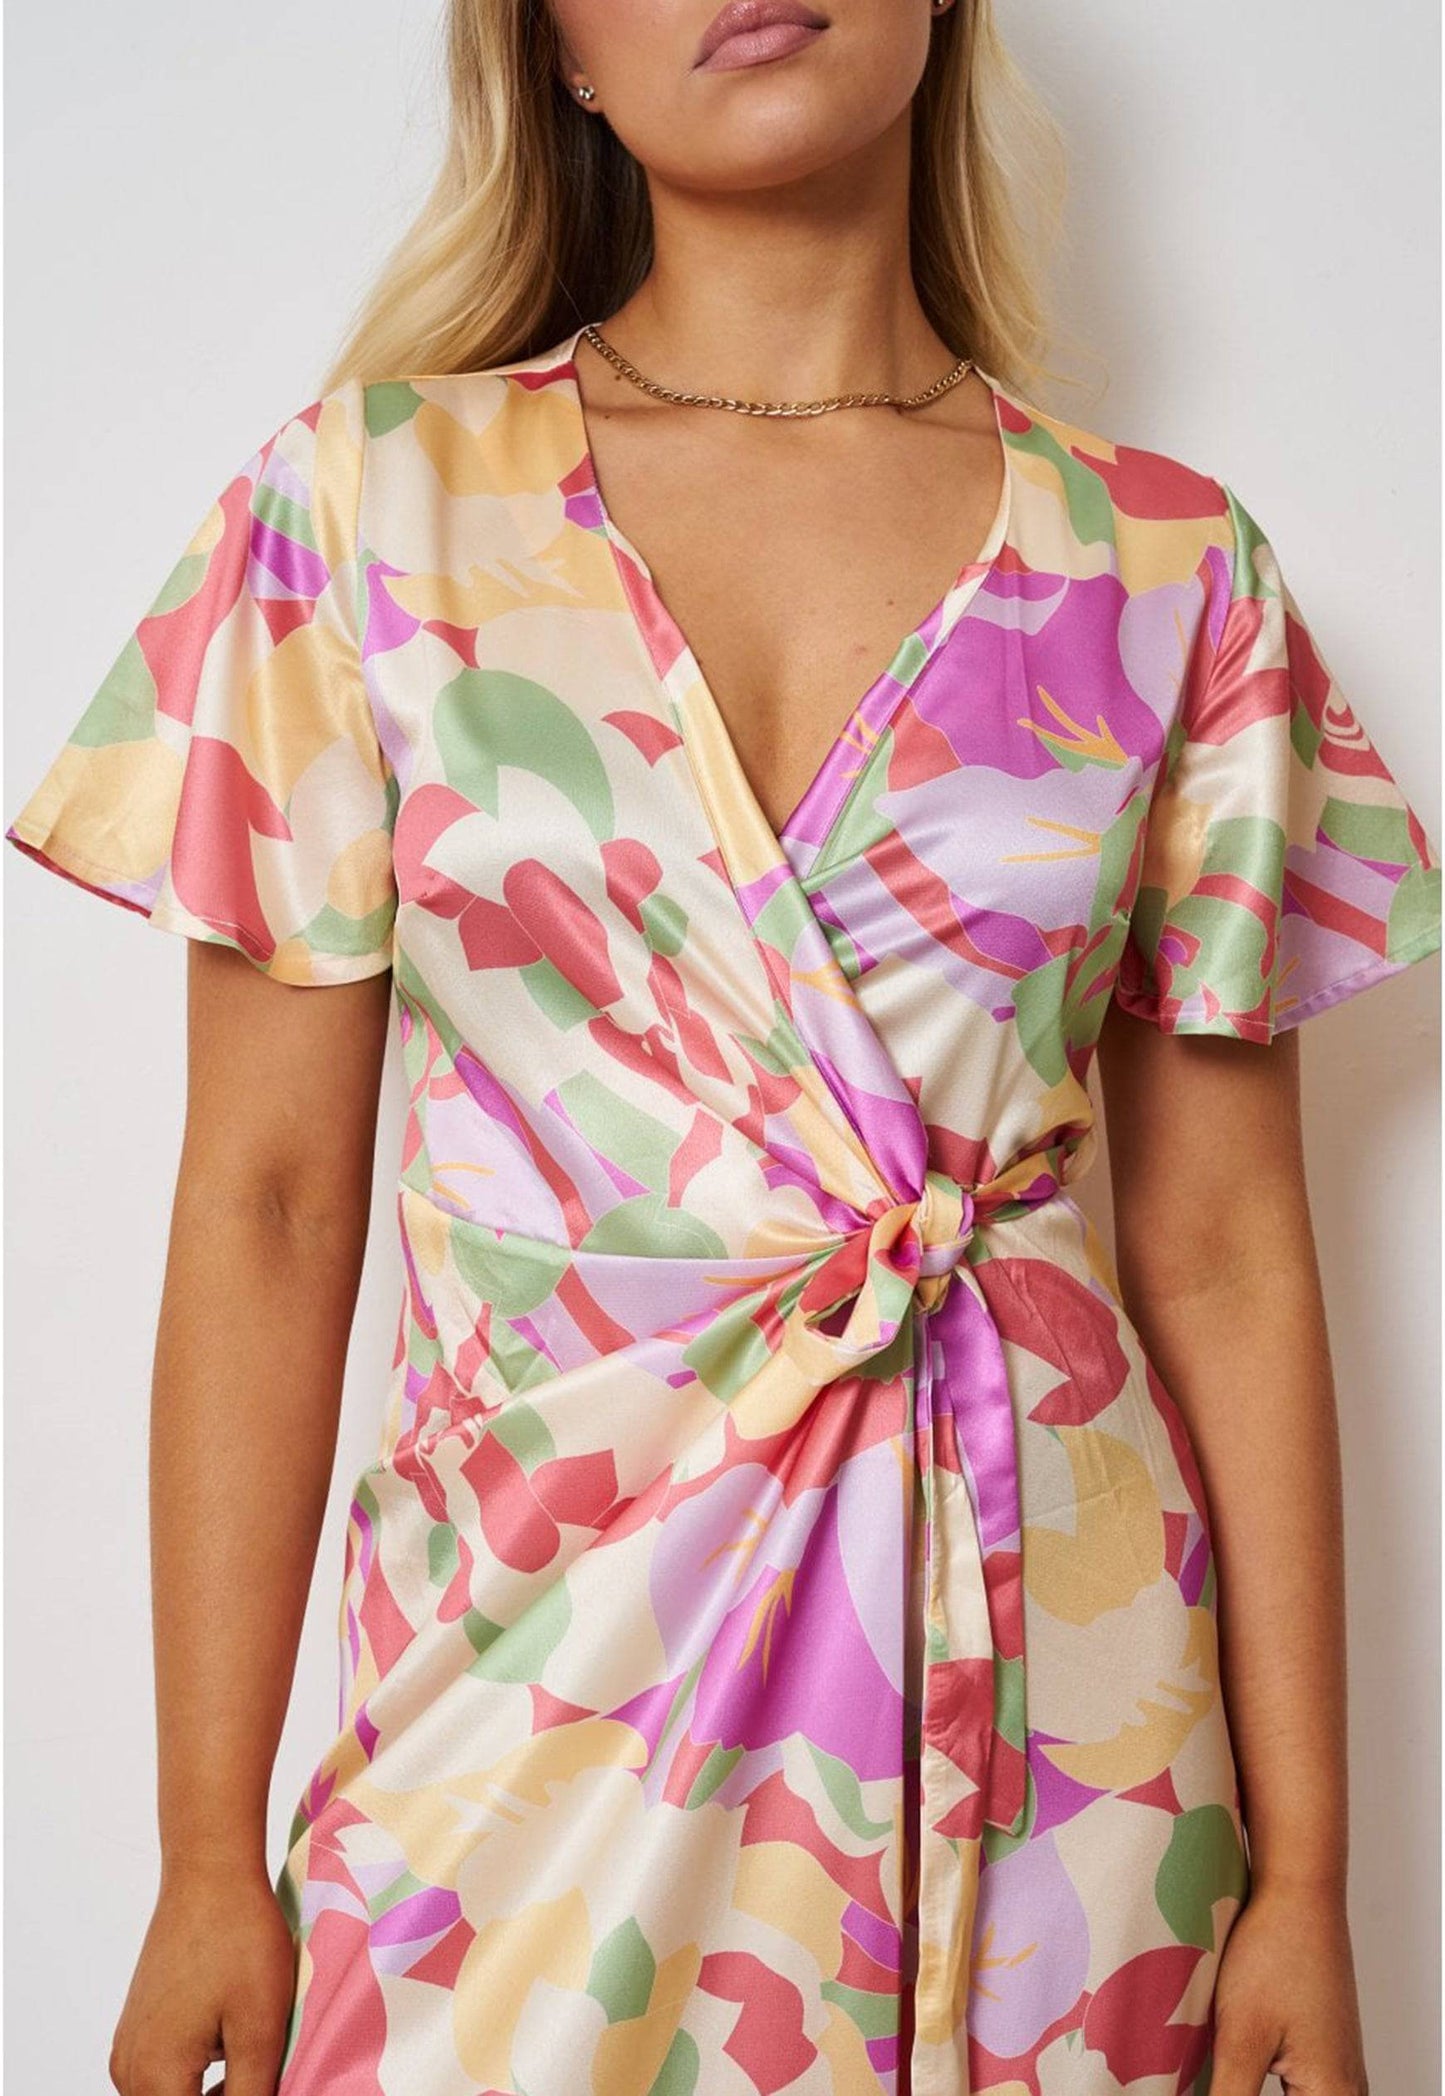 
                  
                    Printed Short Sleeve Satin Wrap Midi Dress in Pastel Pink & Yellow Floral - One Nation Clothing
                  
                